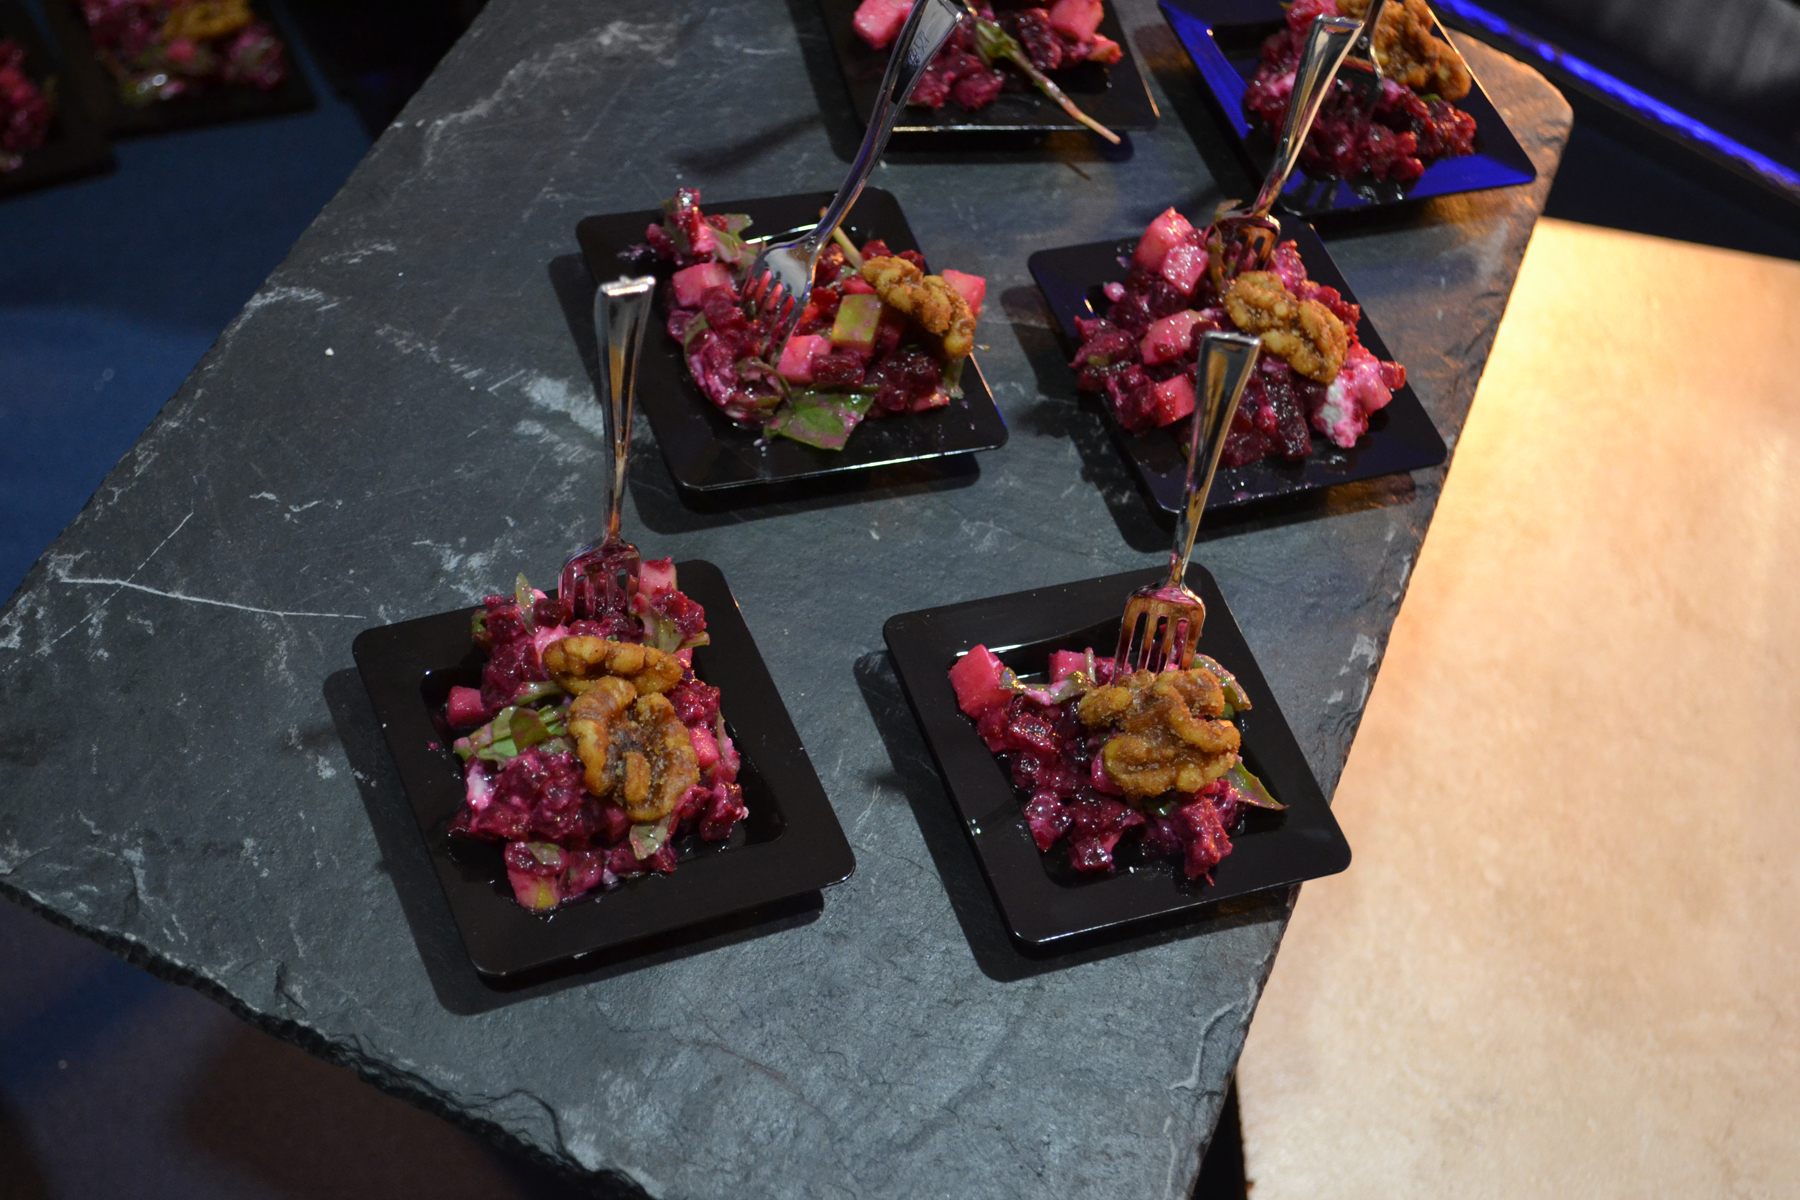 Dishes of Beet and Apple Tartare on table